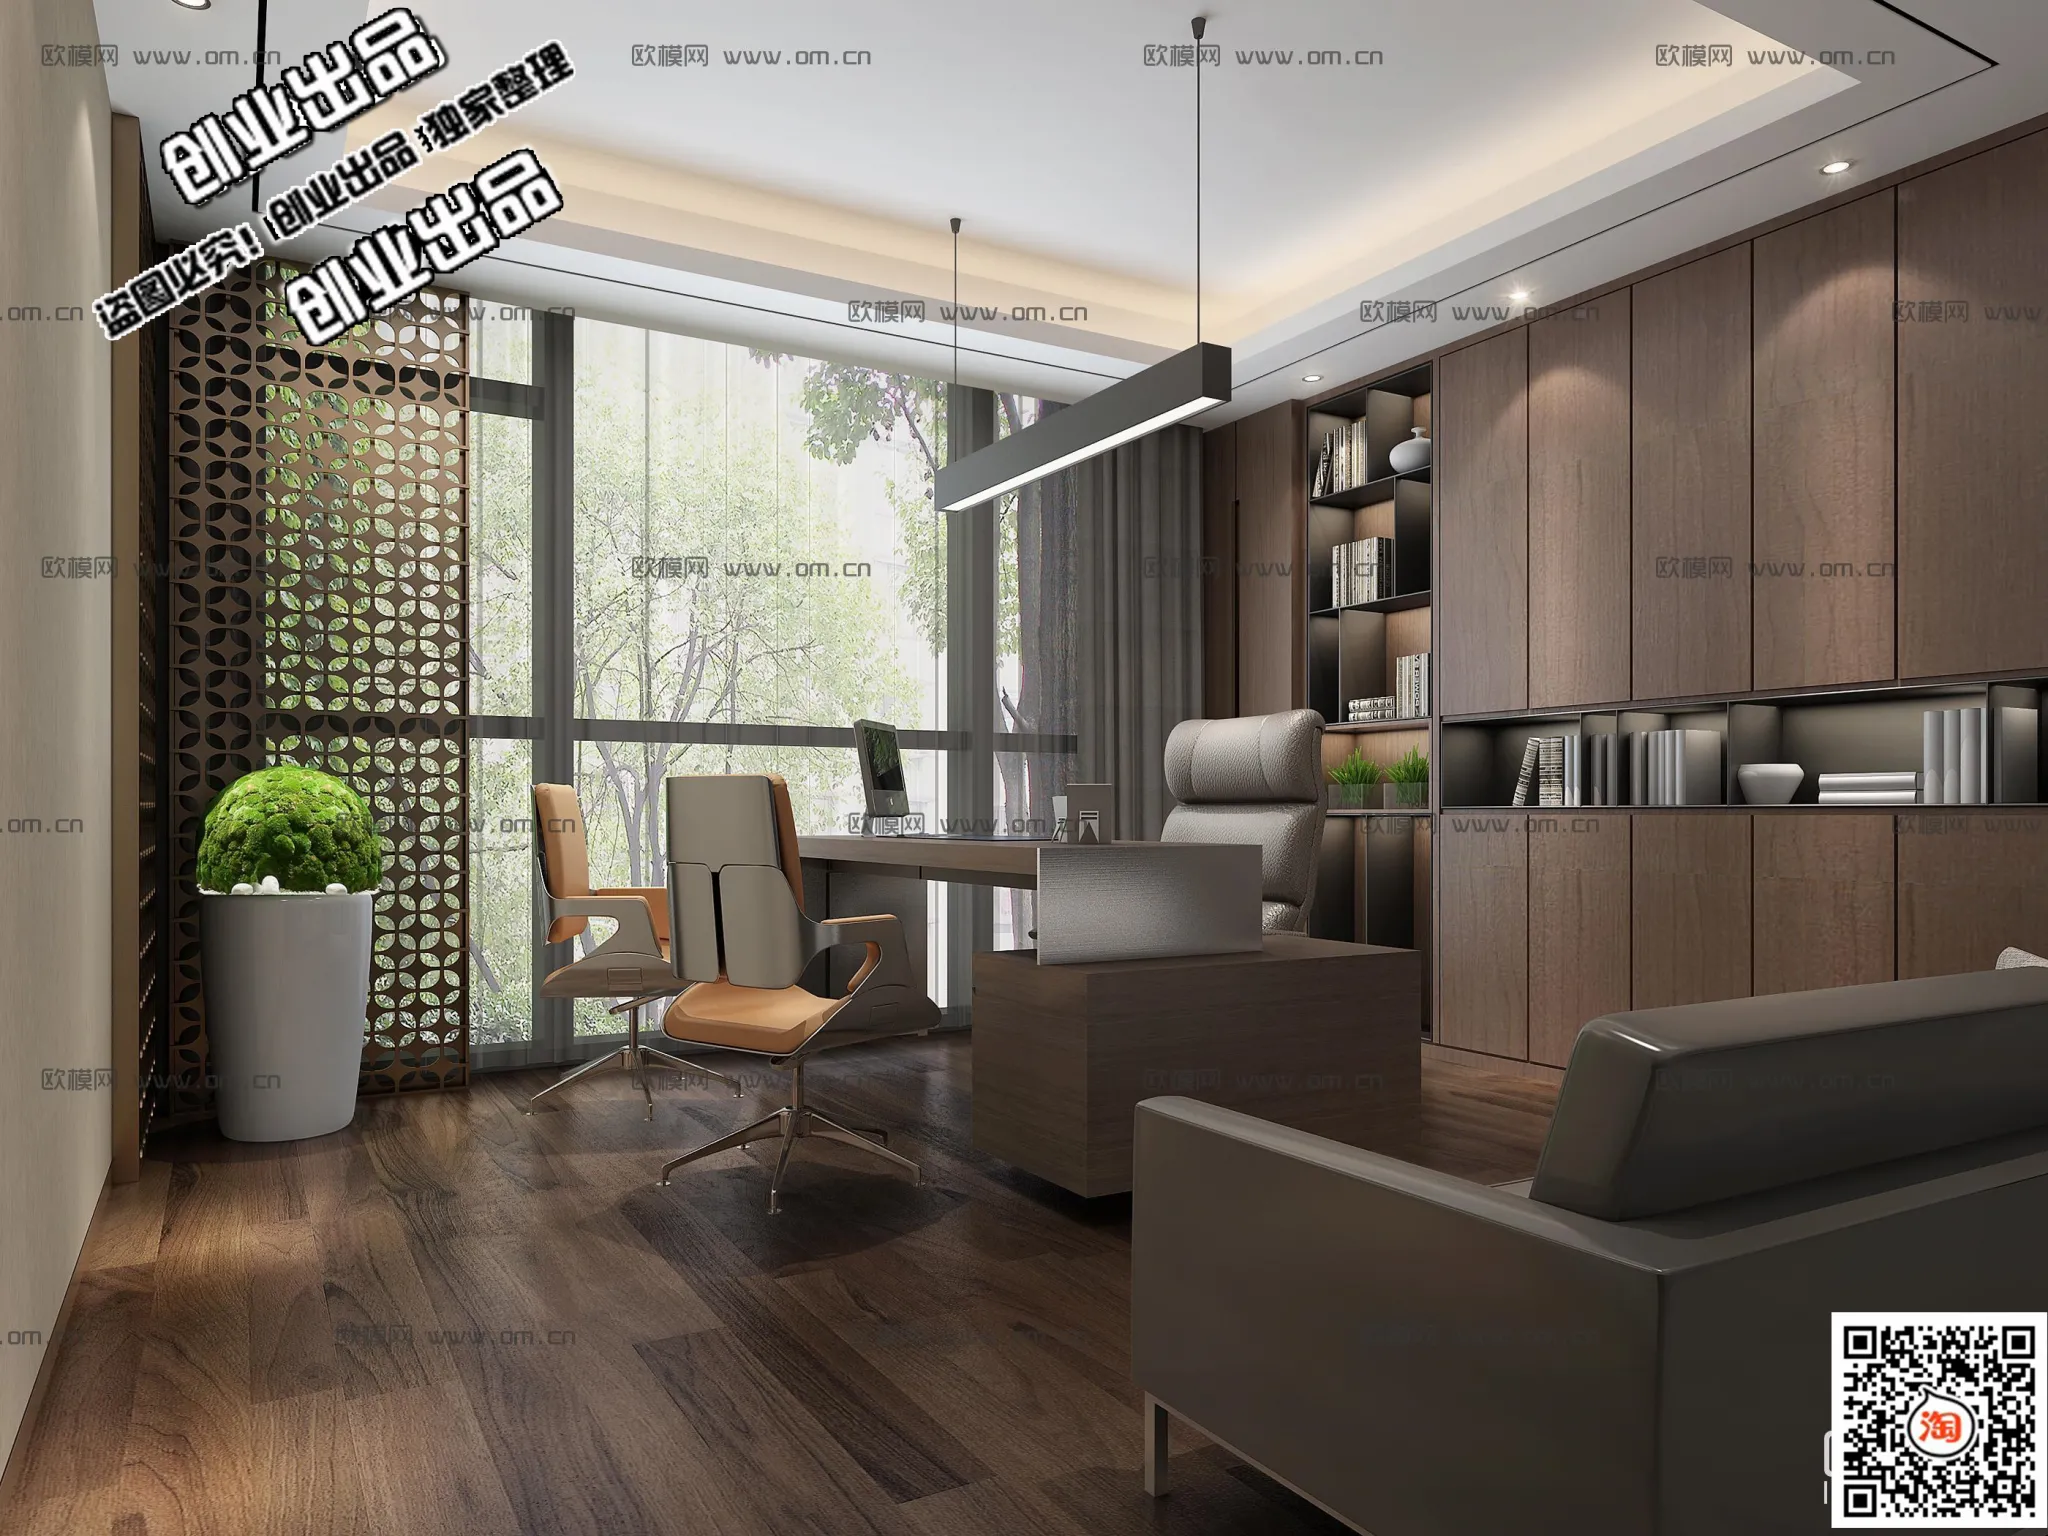 3D OFFICE INTERIOR (VRAY) – MANAGER ROOM 3D SCENES – 044